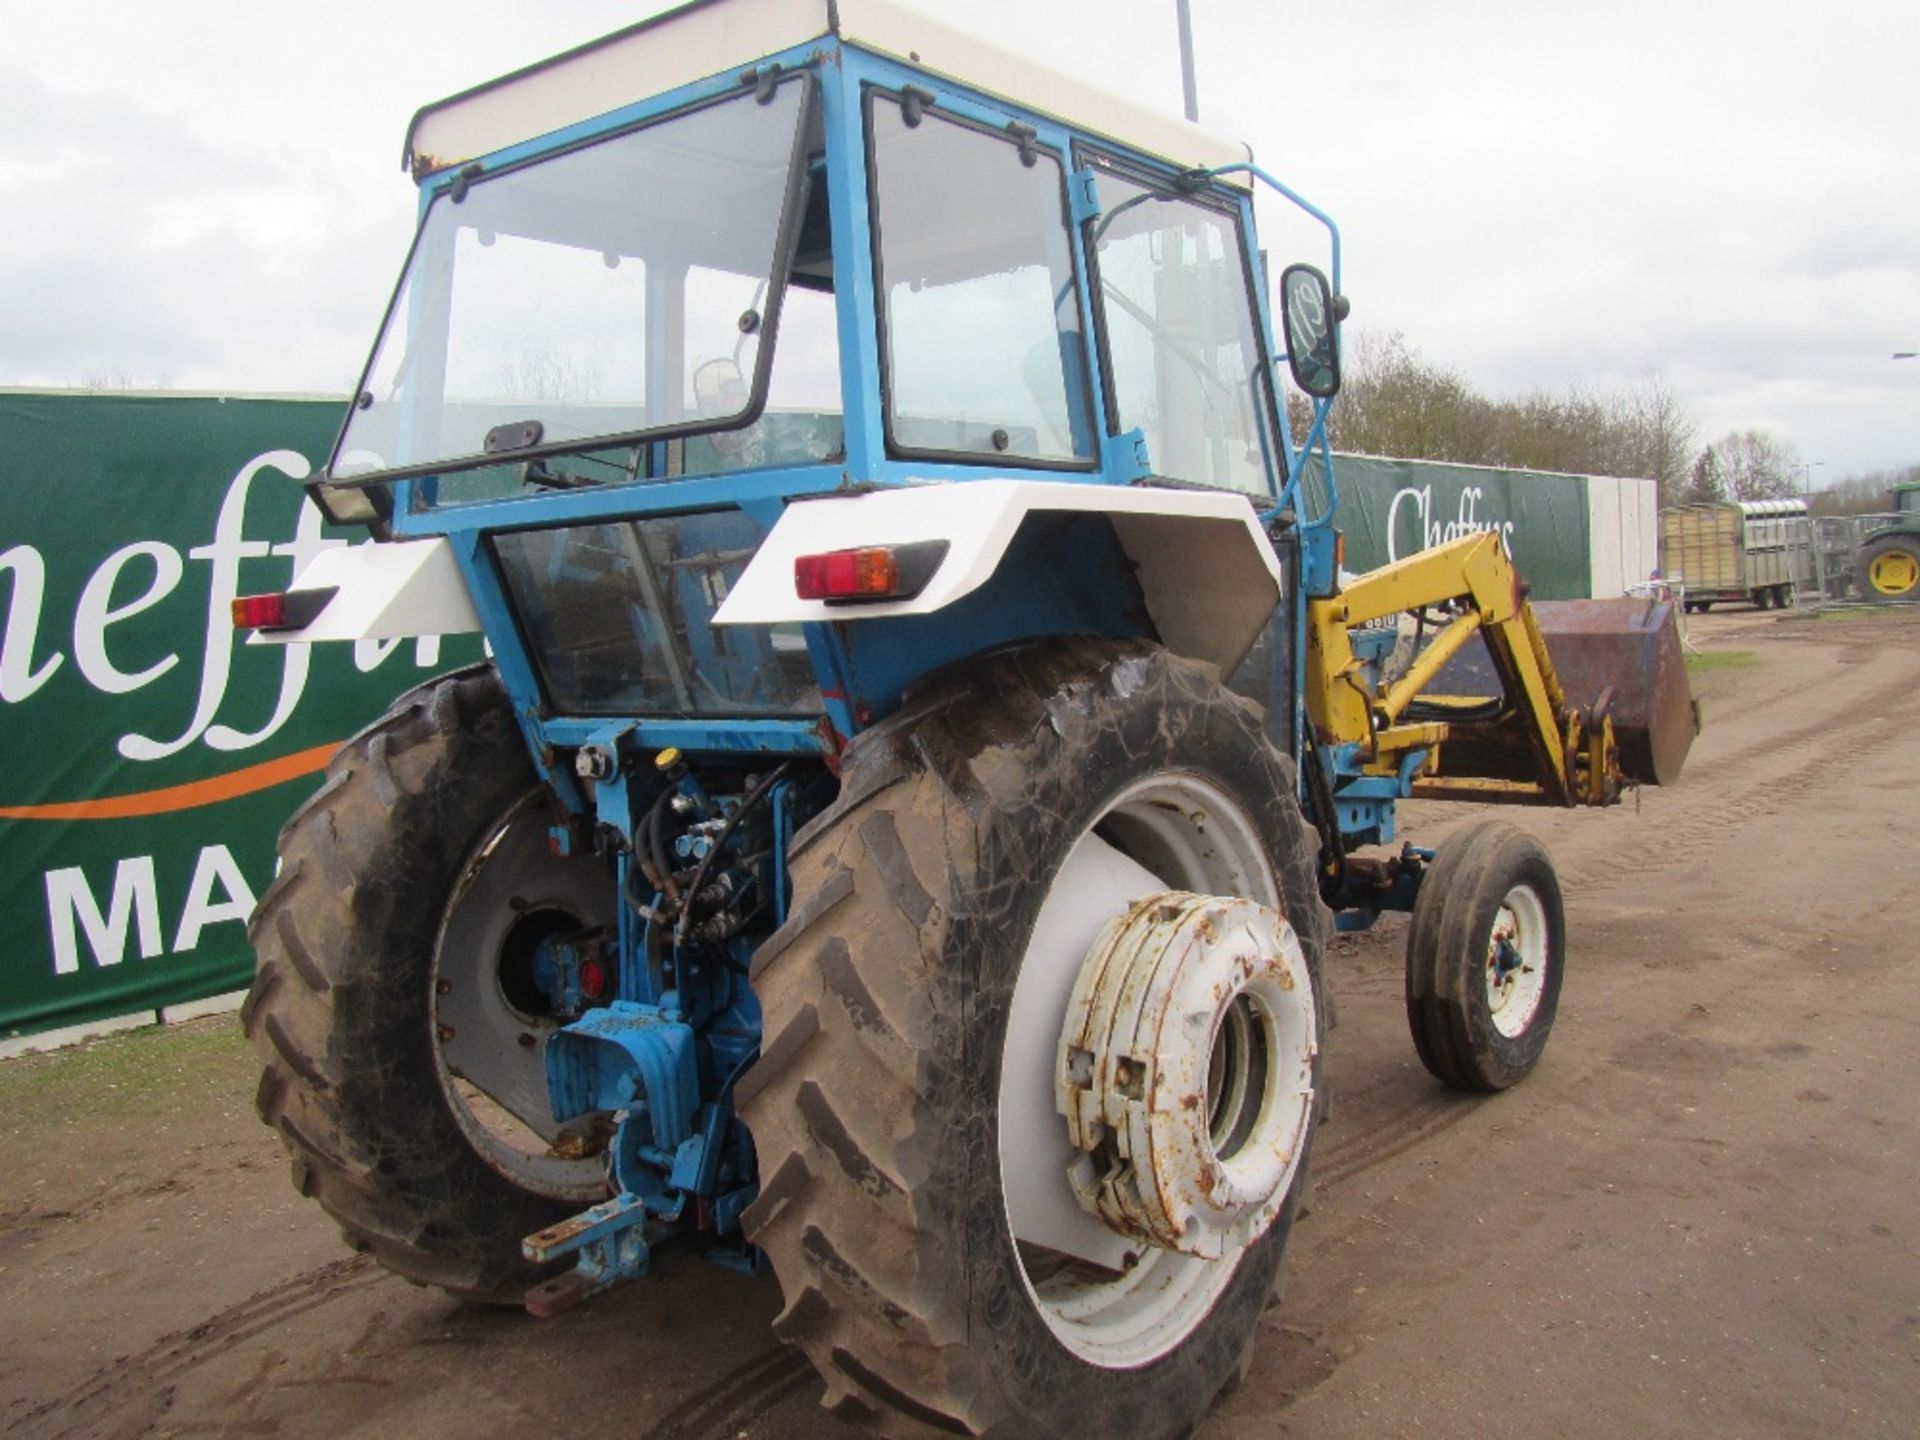 Ford 6610 Series 2 2wd Tractor c/w Bomford Front Loader and Bucket 2000 Hrs - Image 8 of 10